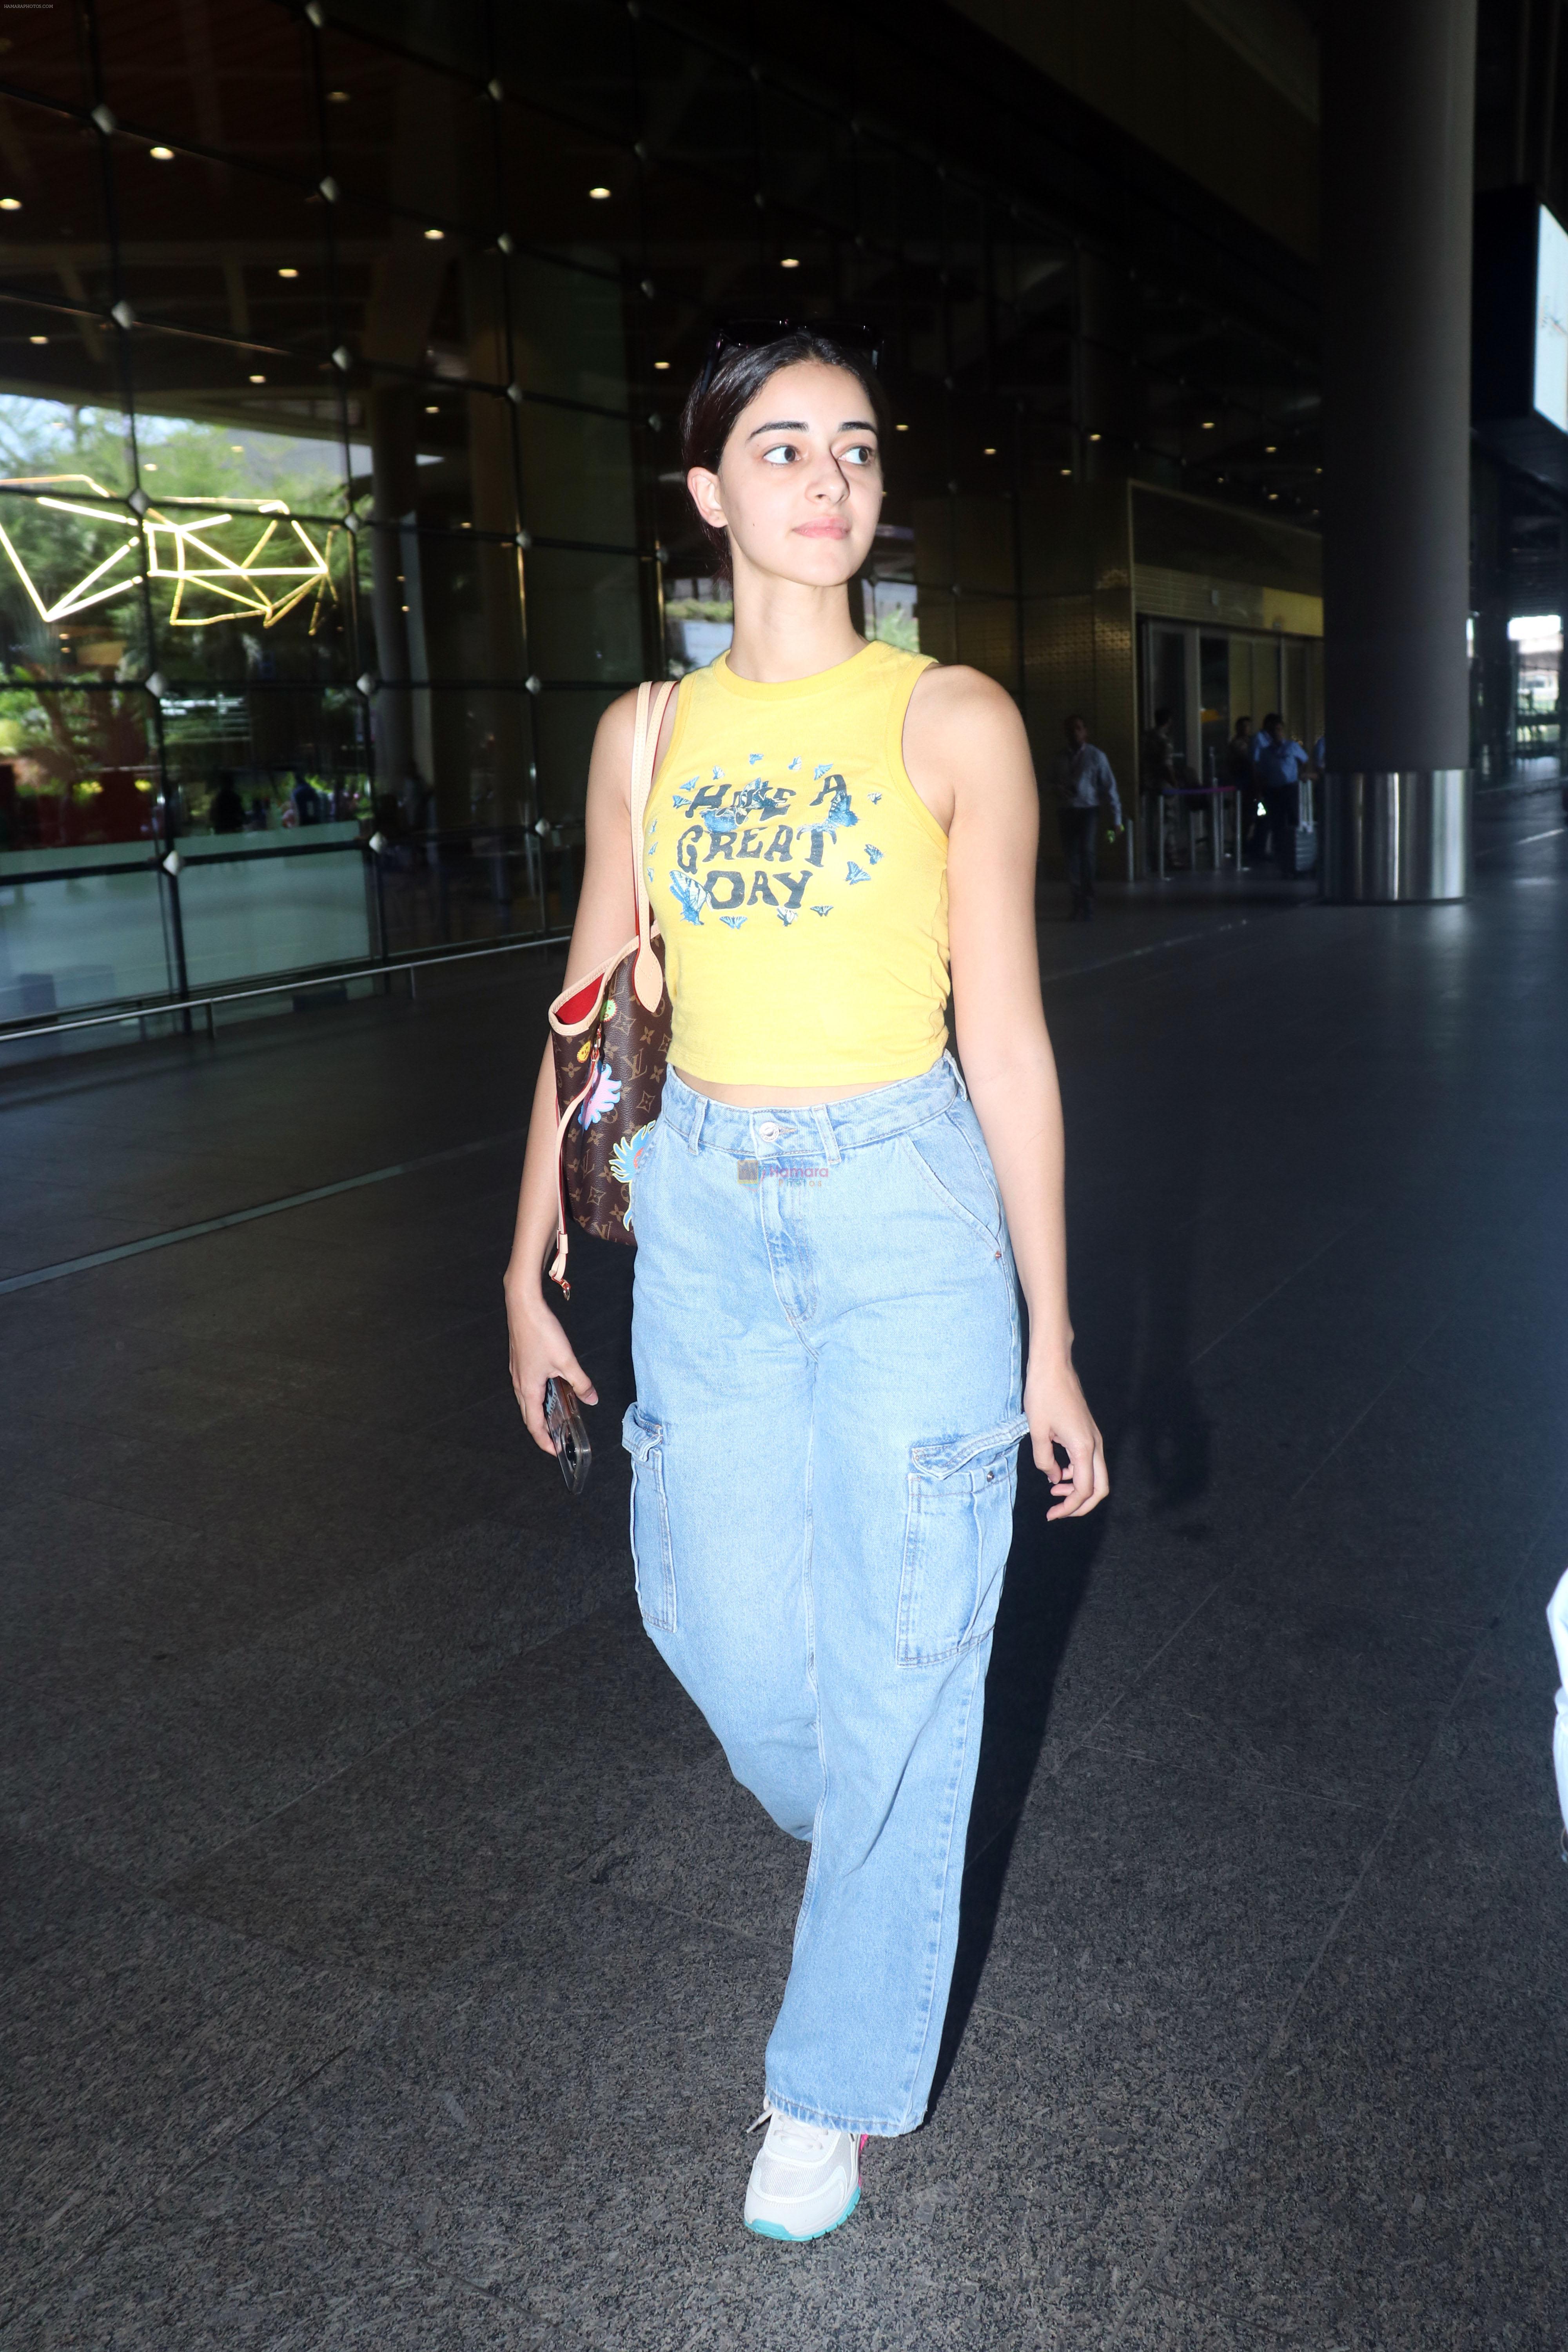 Ananya Panday in a Yellow tank top and blue jeans on 23rd May 2023